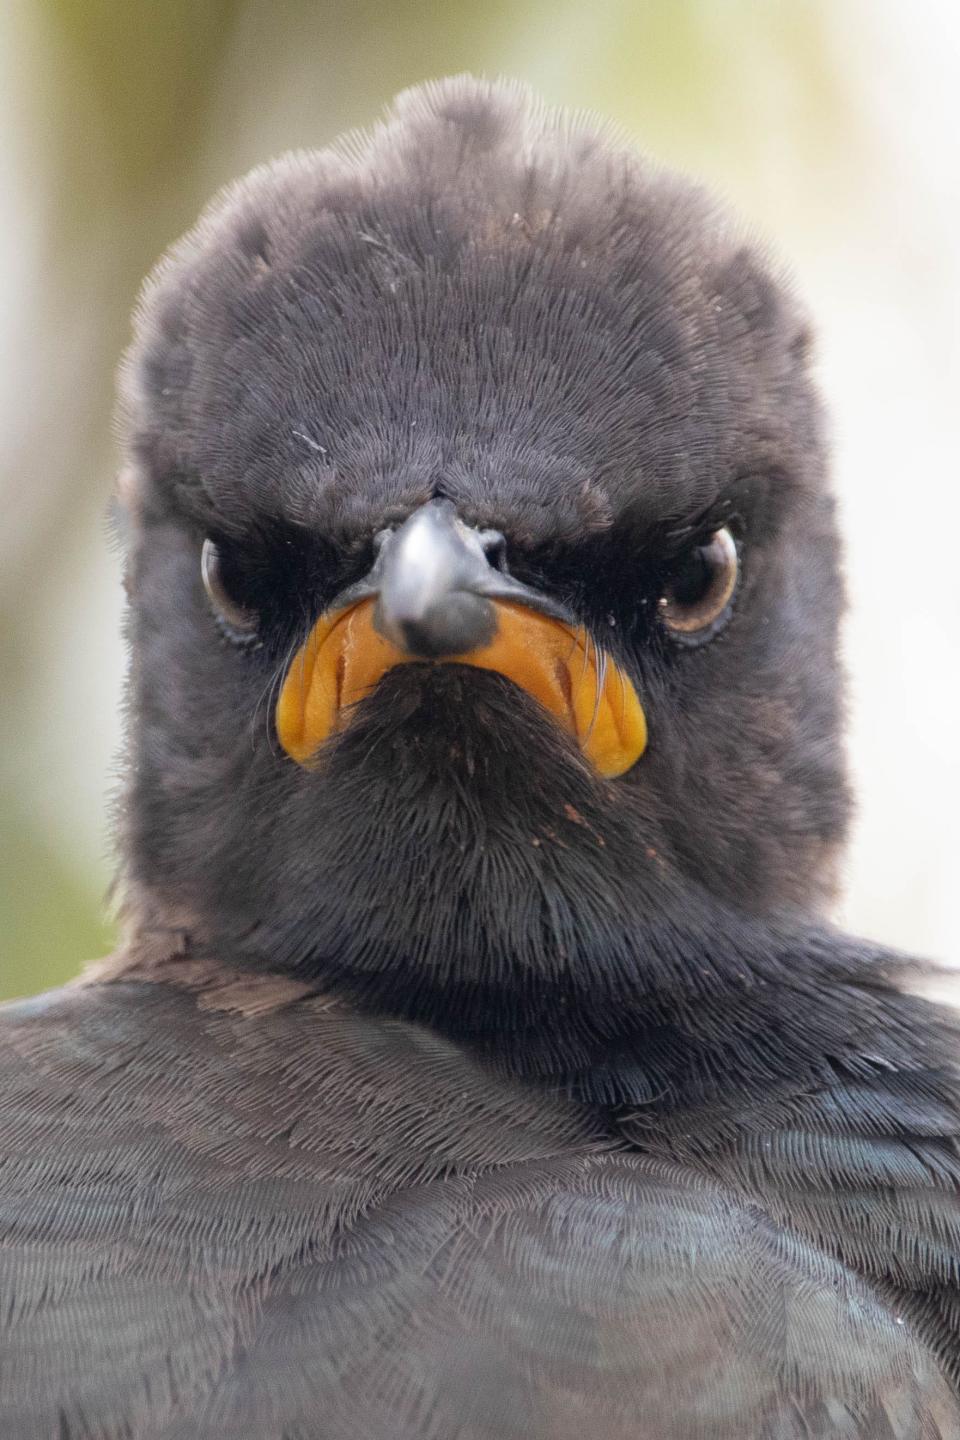 angry looking bird, comedy wildlife photography awards 2021